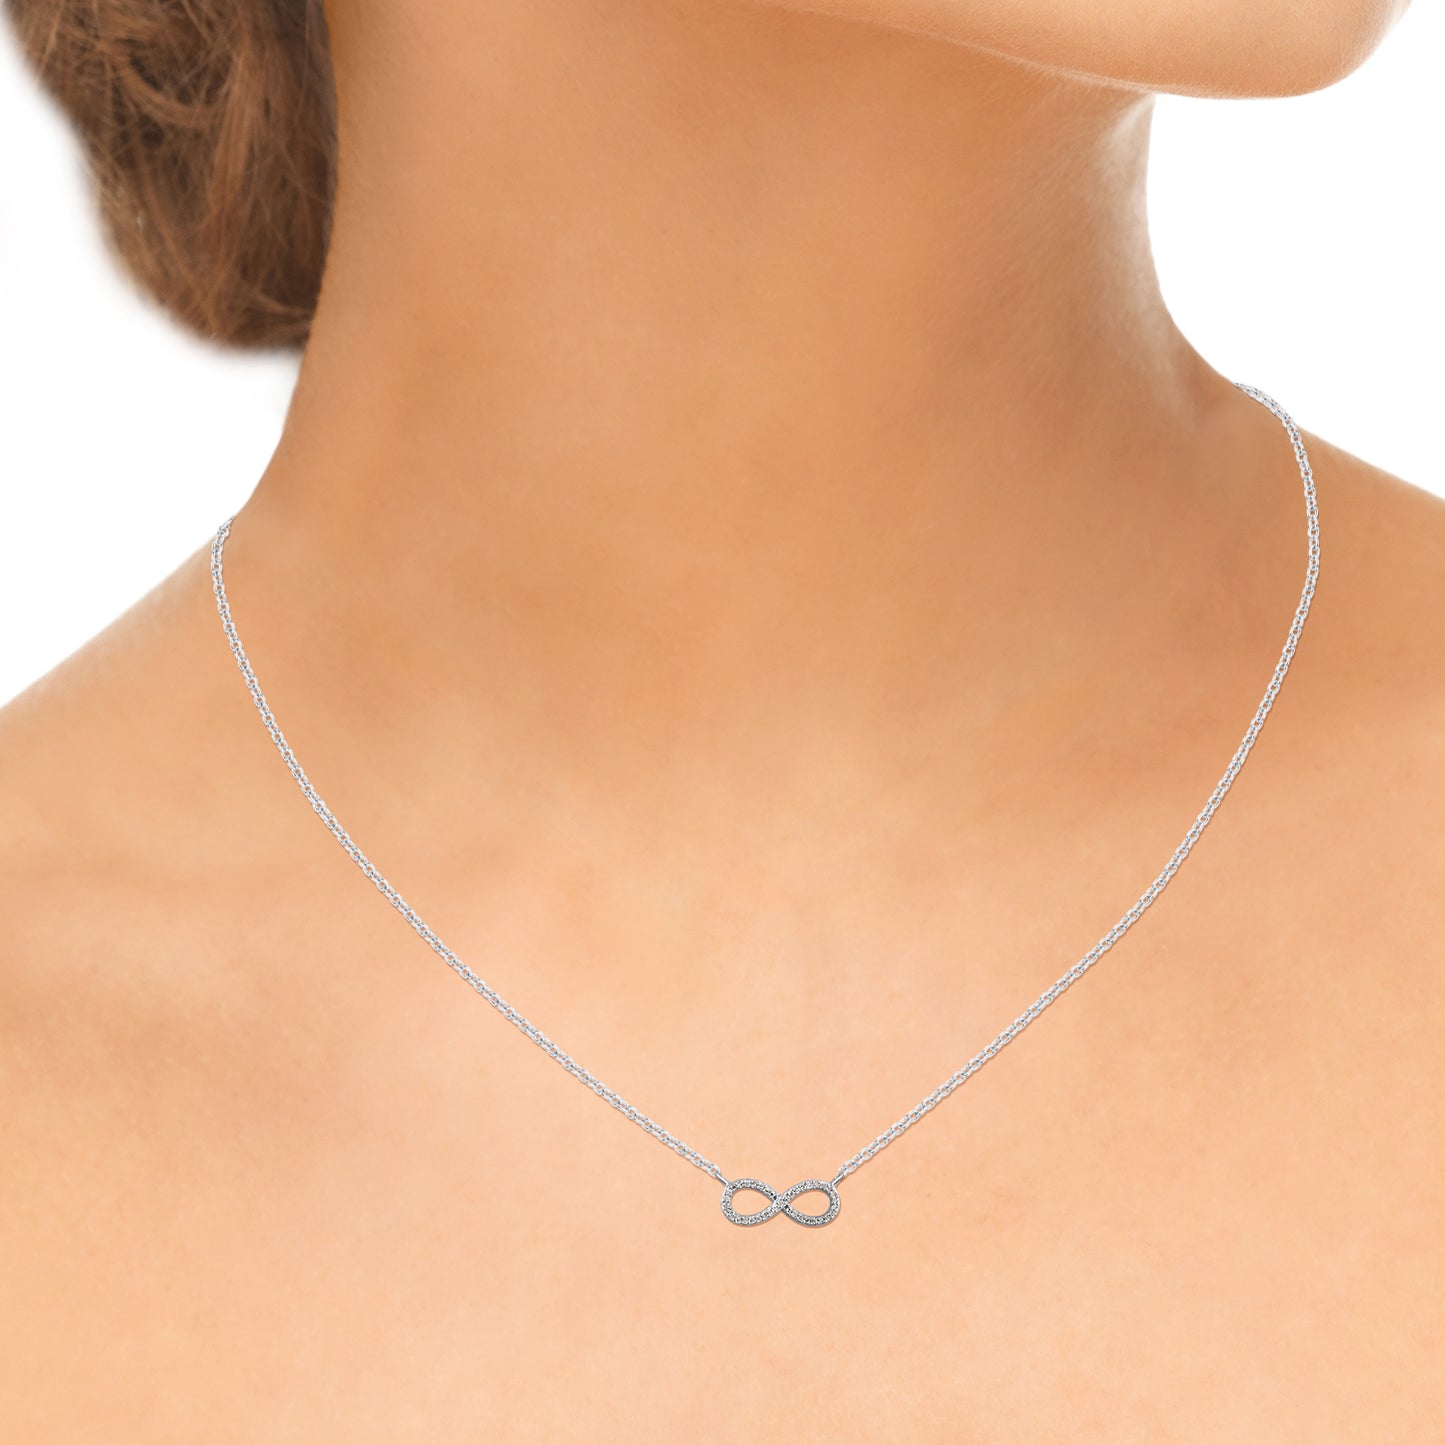 Infinity Pendant Necklace in 925 Sterling Silver